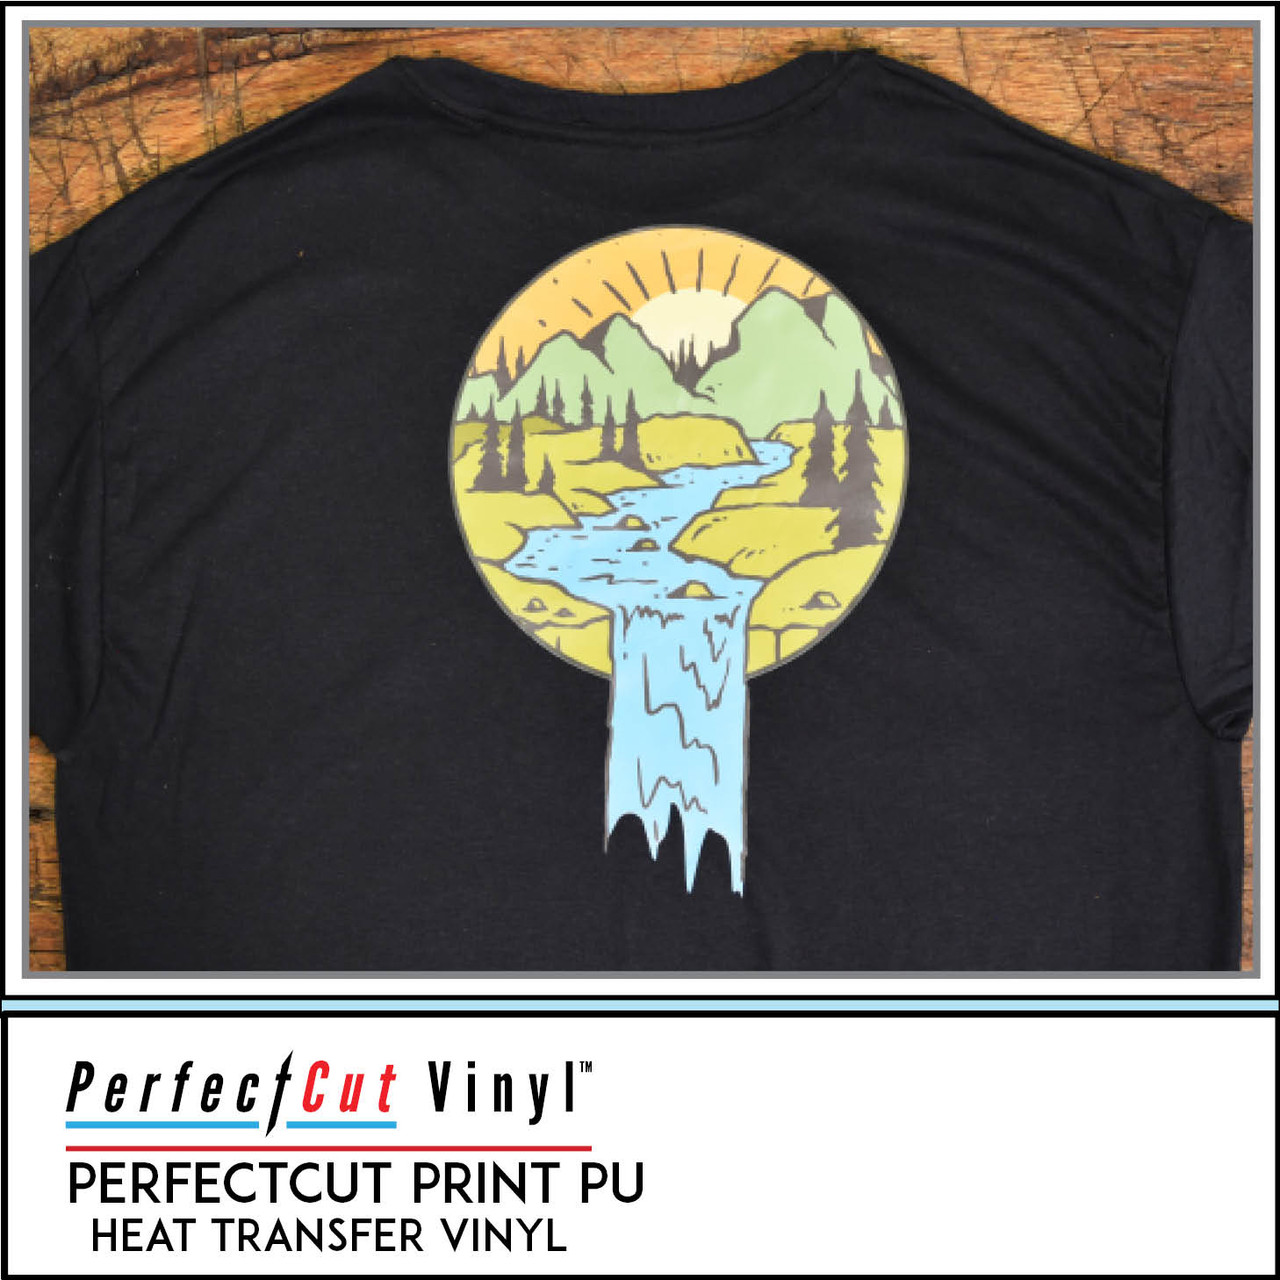 How to Cut and Use Heat Transfer Vinyl